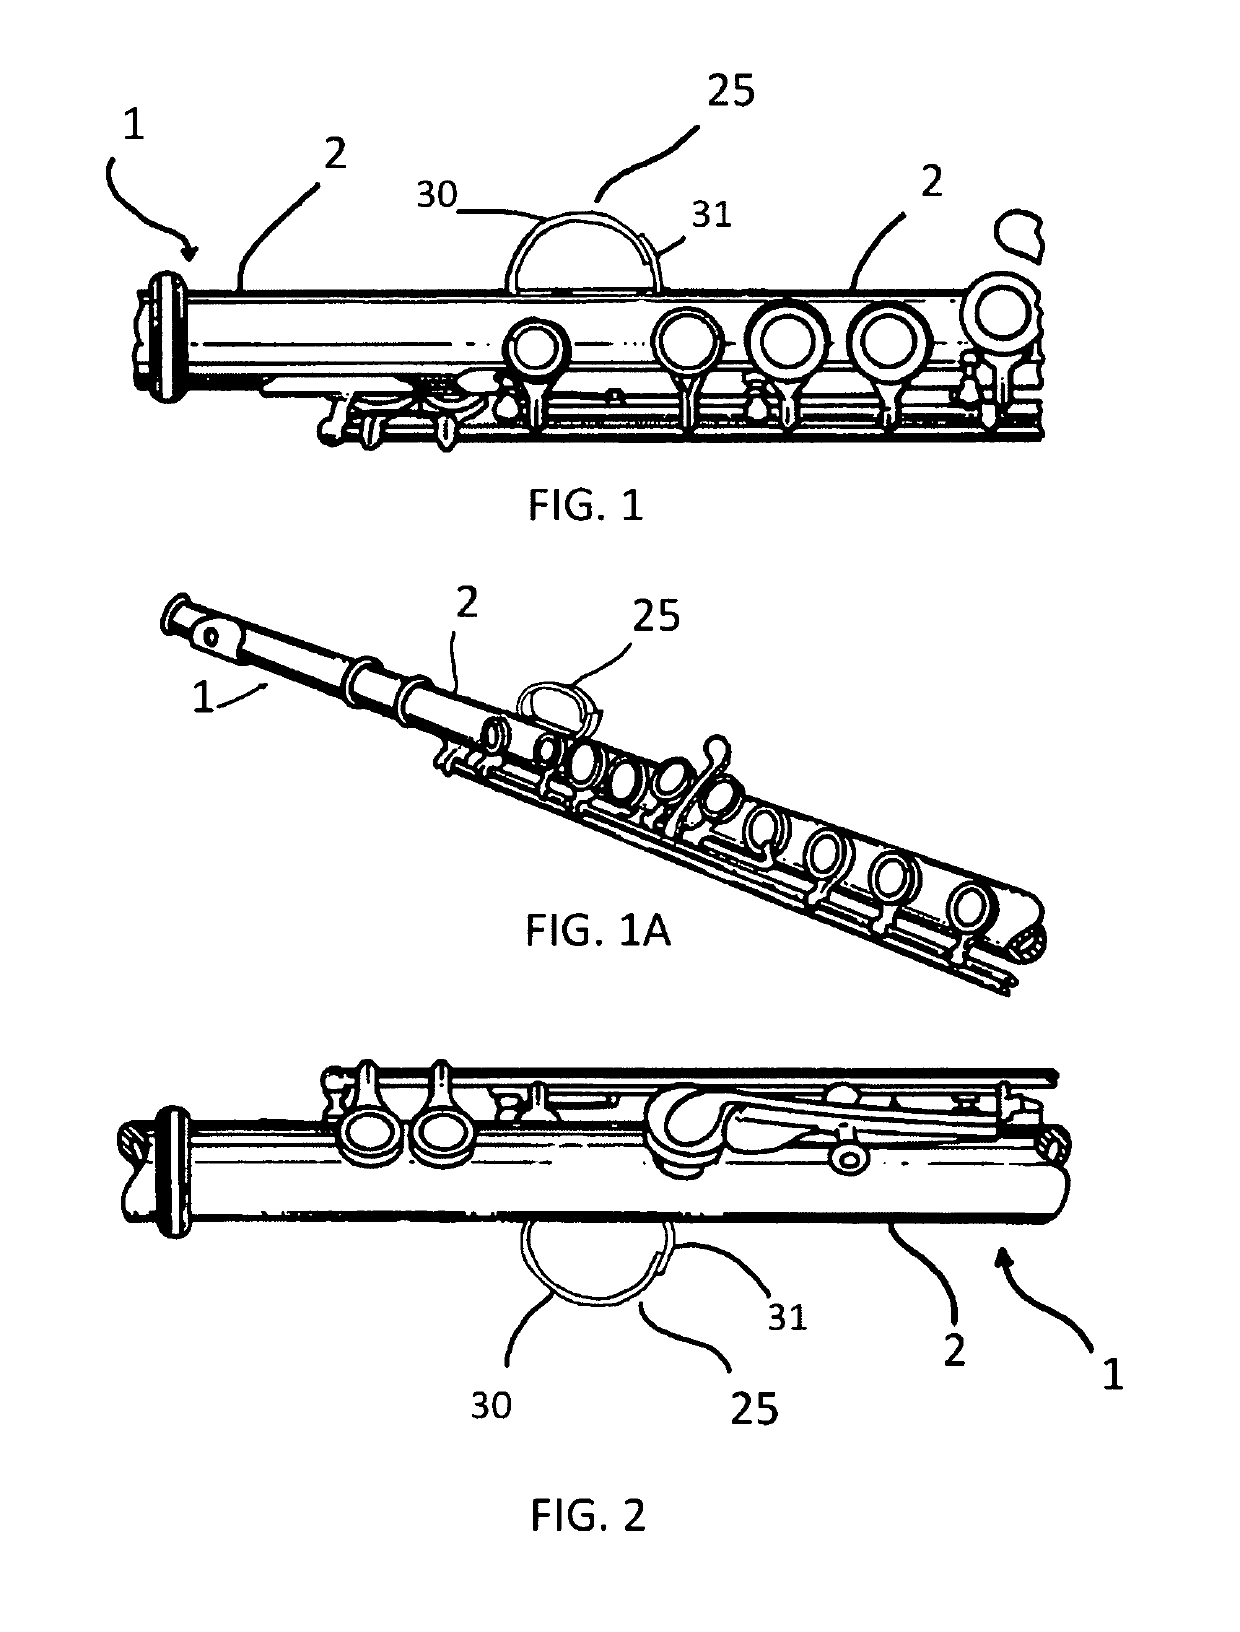 Flute with enhanced flute-finger connection